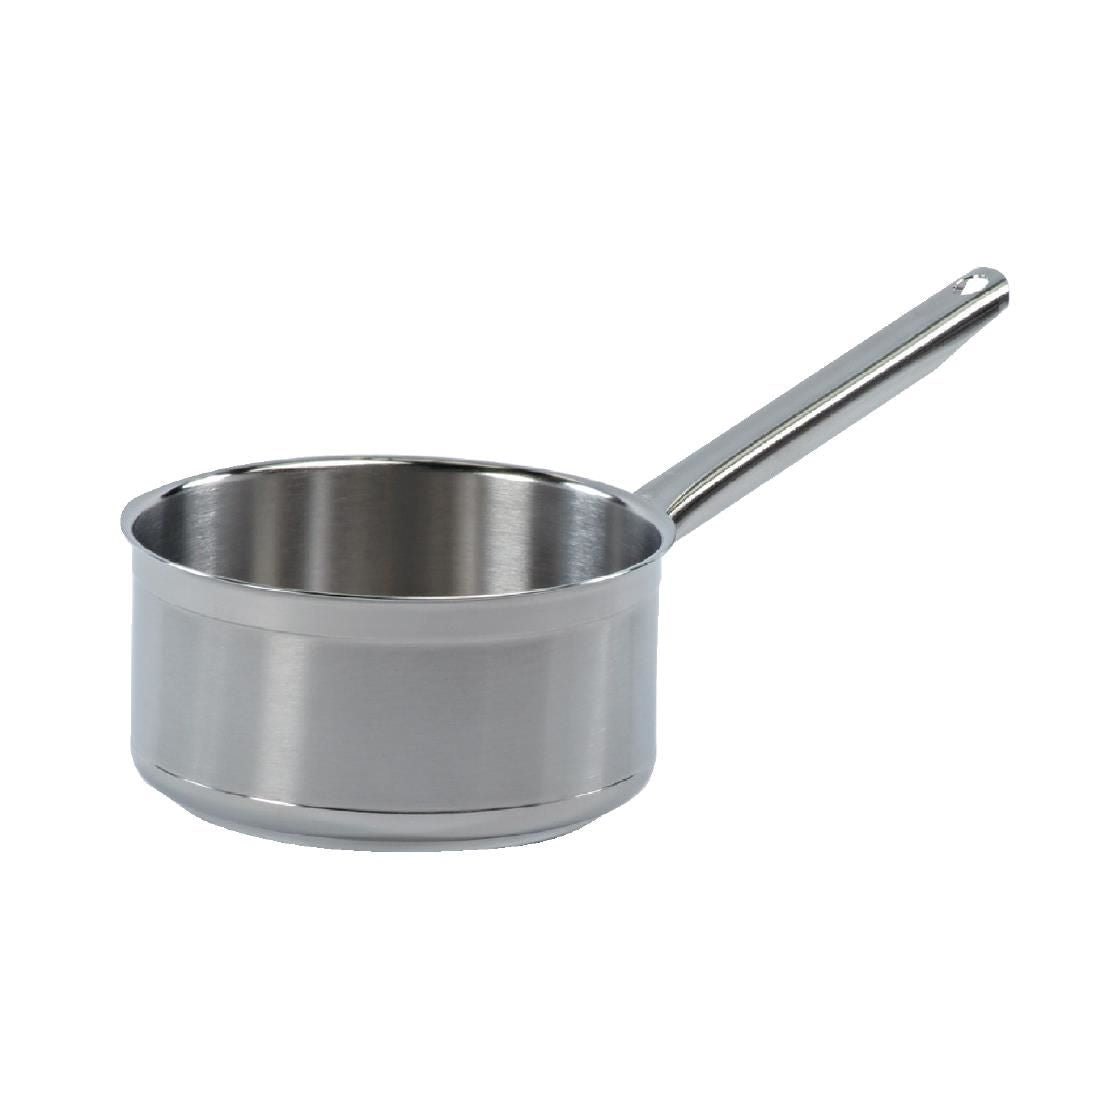 Bourgeat Tradition Plus Stainless Steel Saucepan 5.4Ltr JD Catering Equipment Solutions Ltd